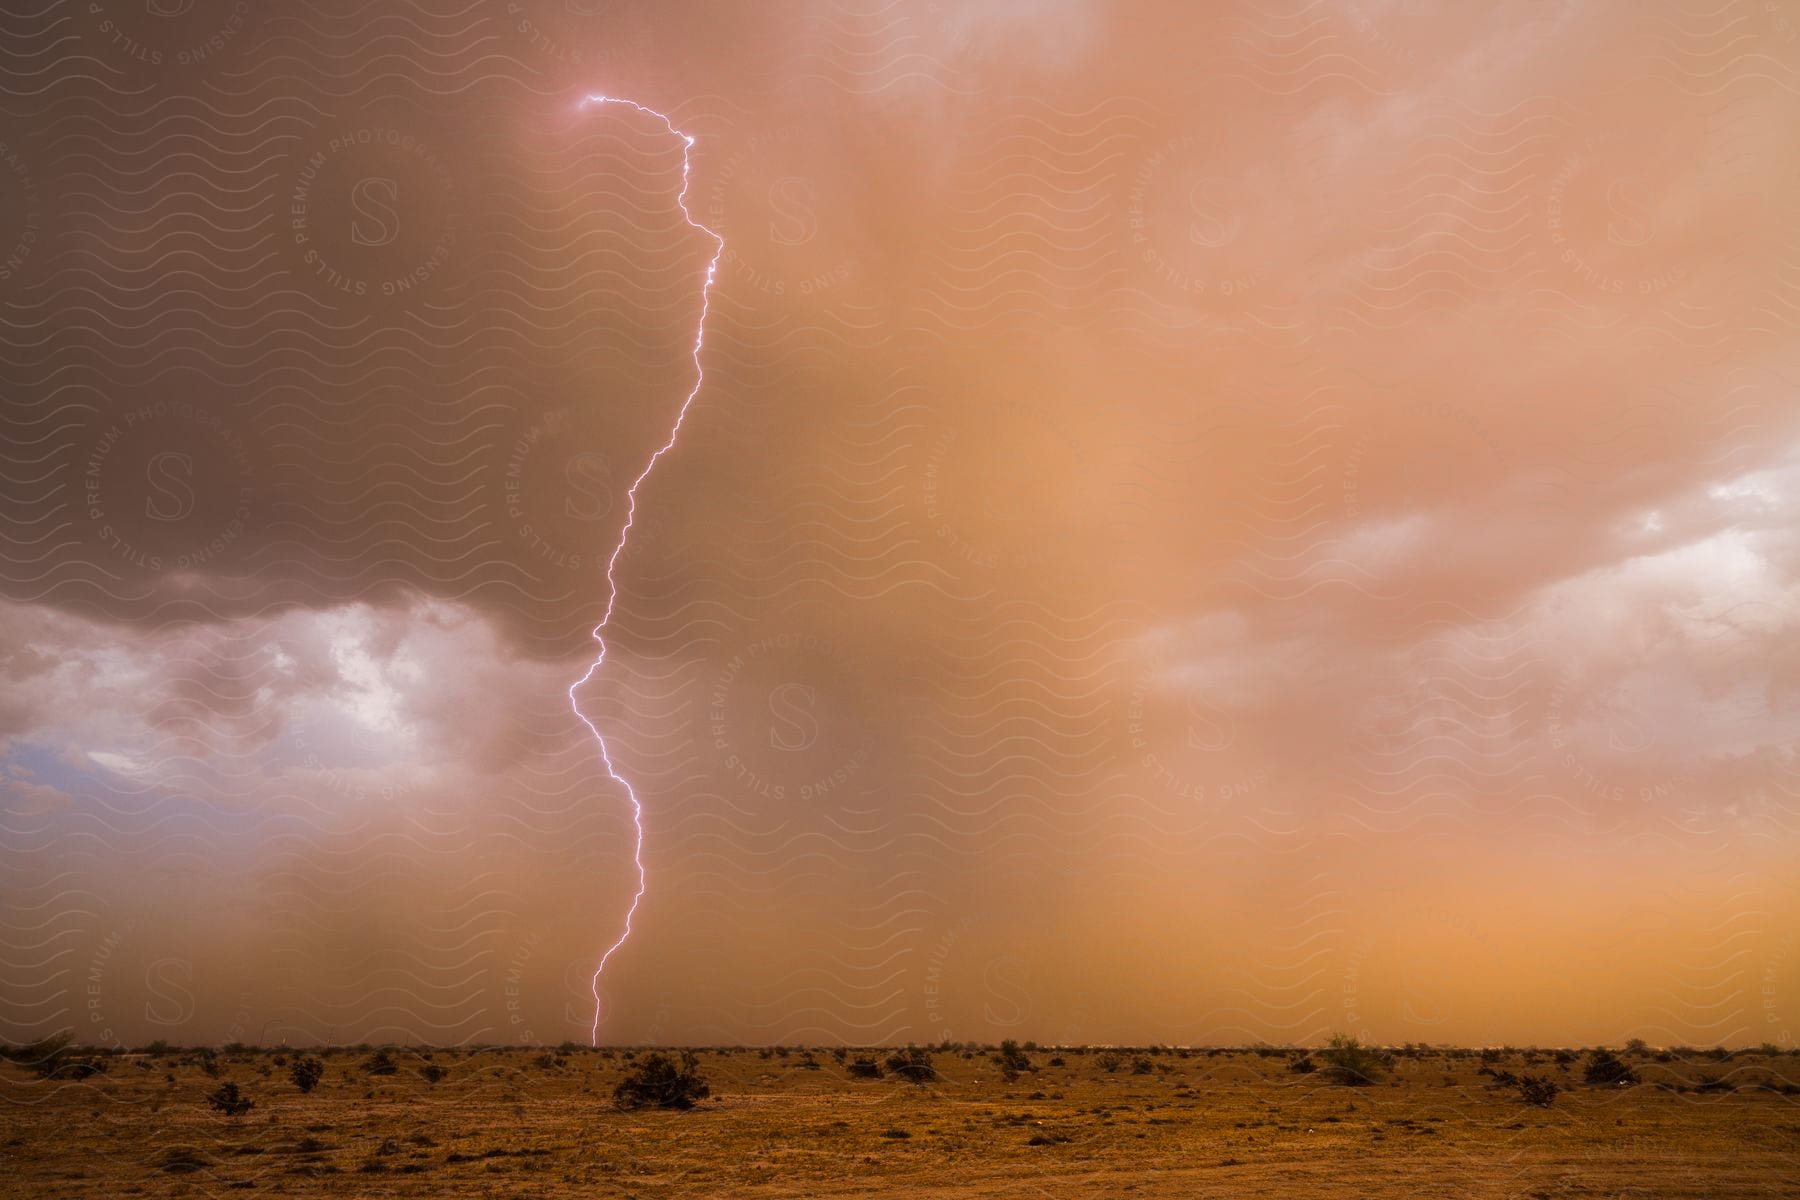 Flat landscape with thunder cutting through the cloudy sky during a storm in the arizona desert